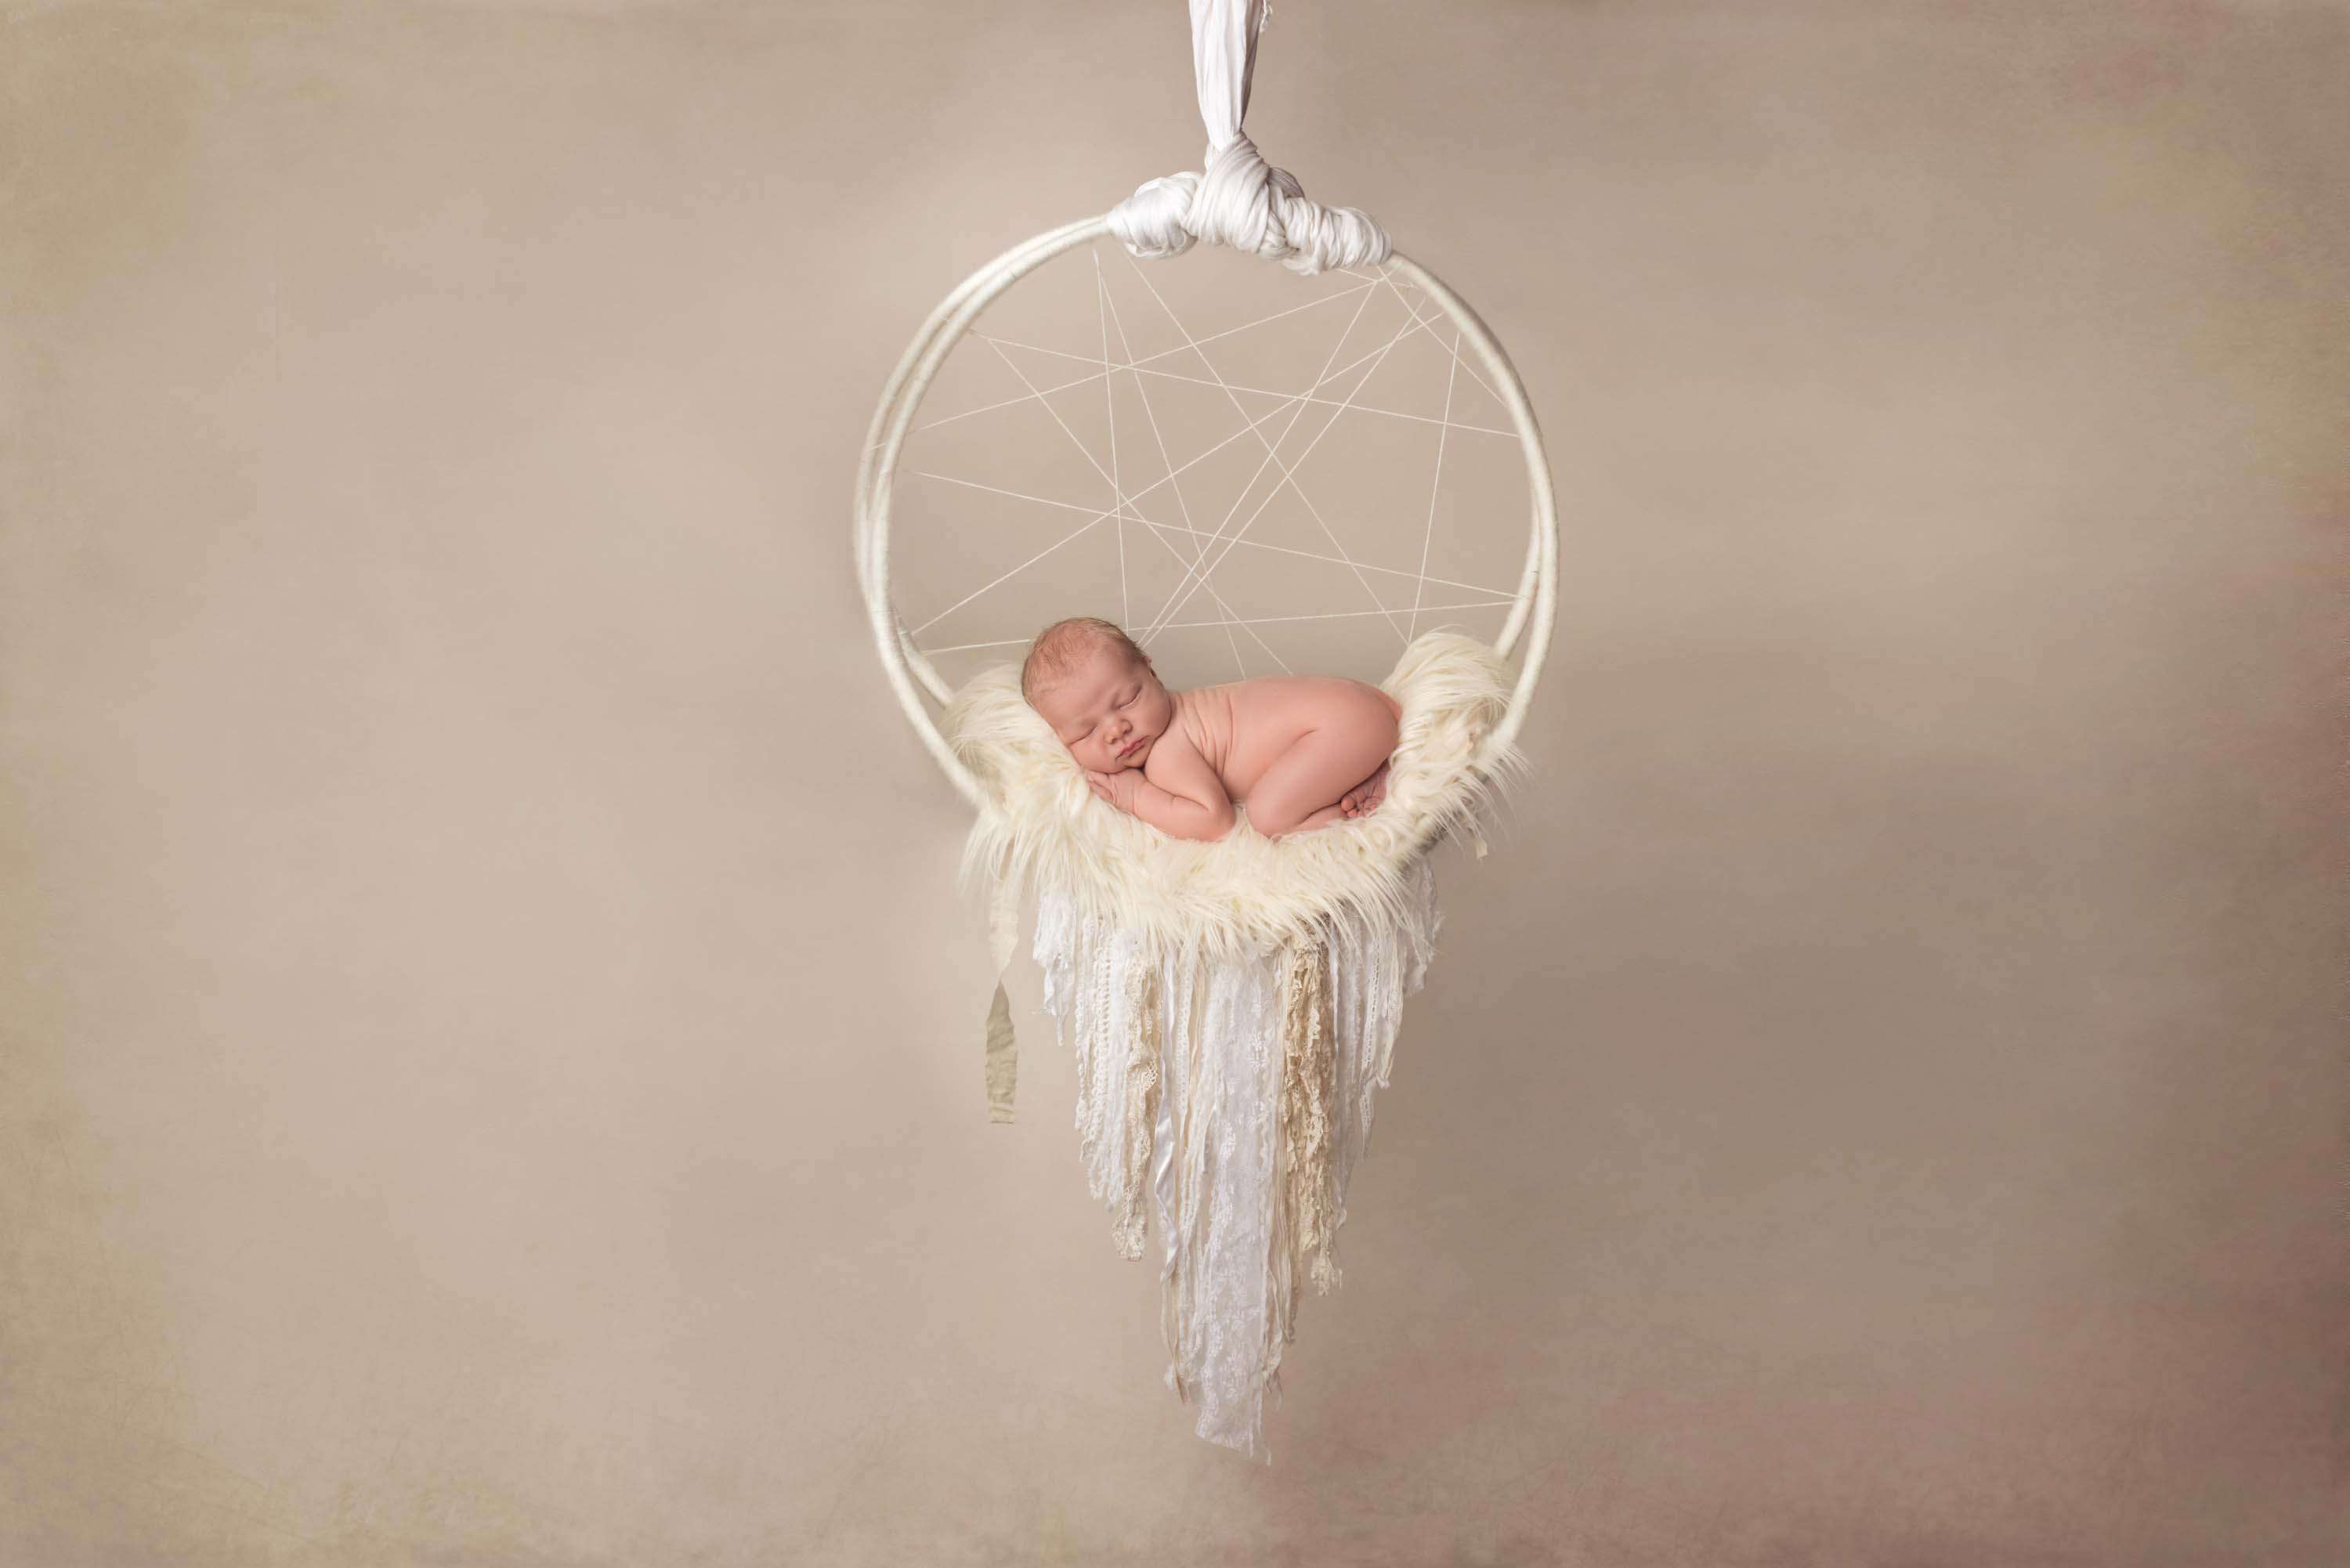 Week old baby boy suspended in the air lying in a dreamcatcher